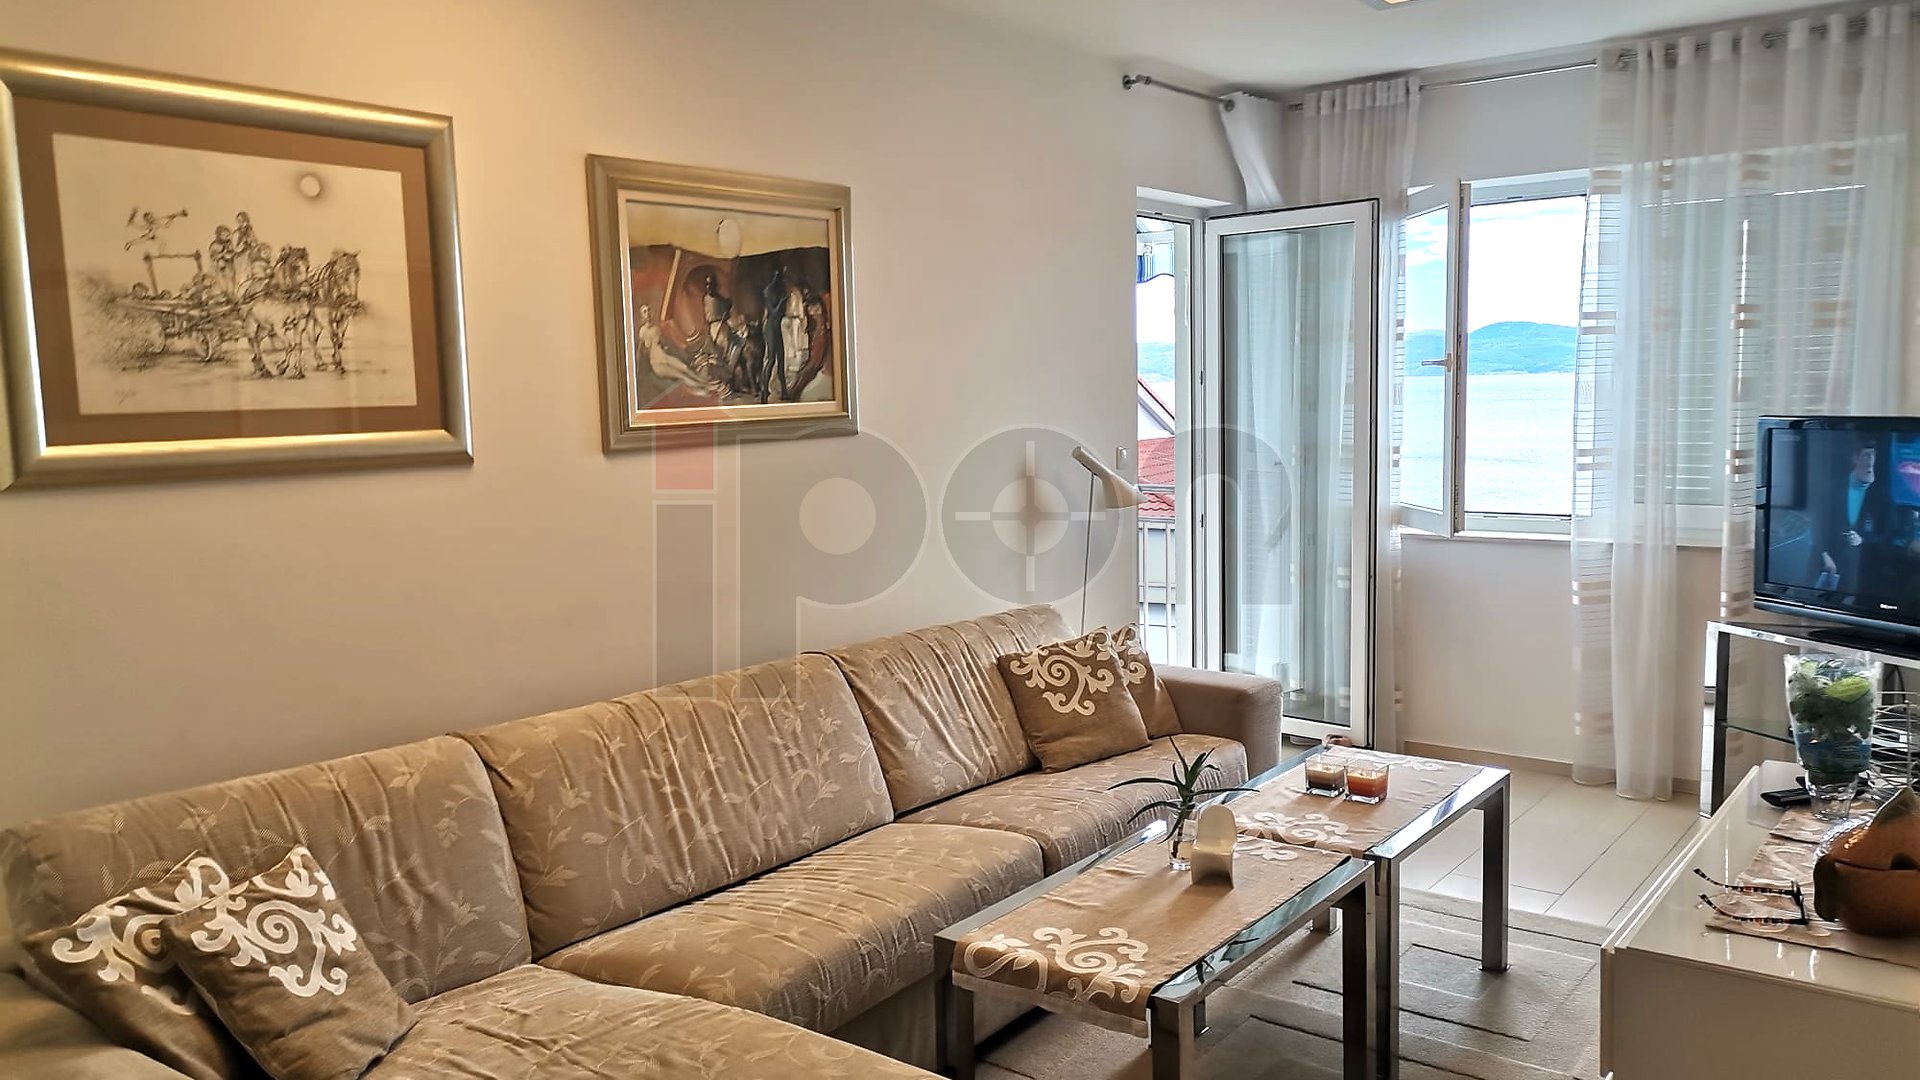 Apartment, 73 m2, For Sale, Selce